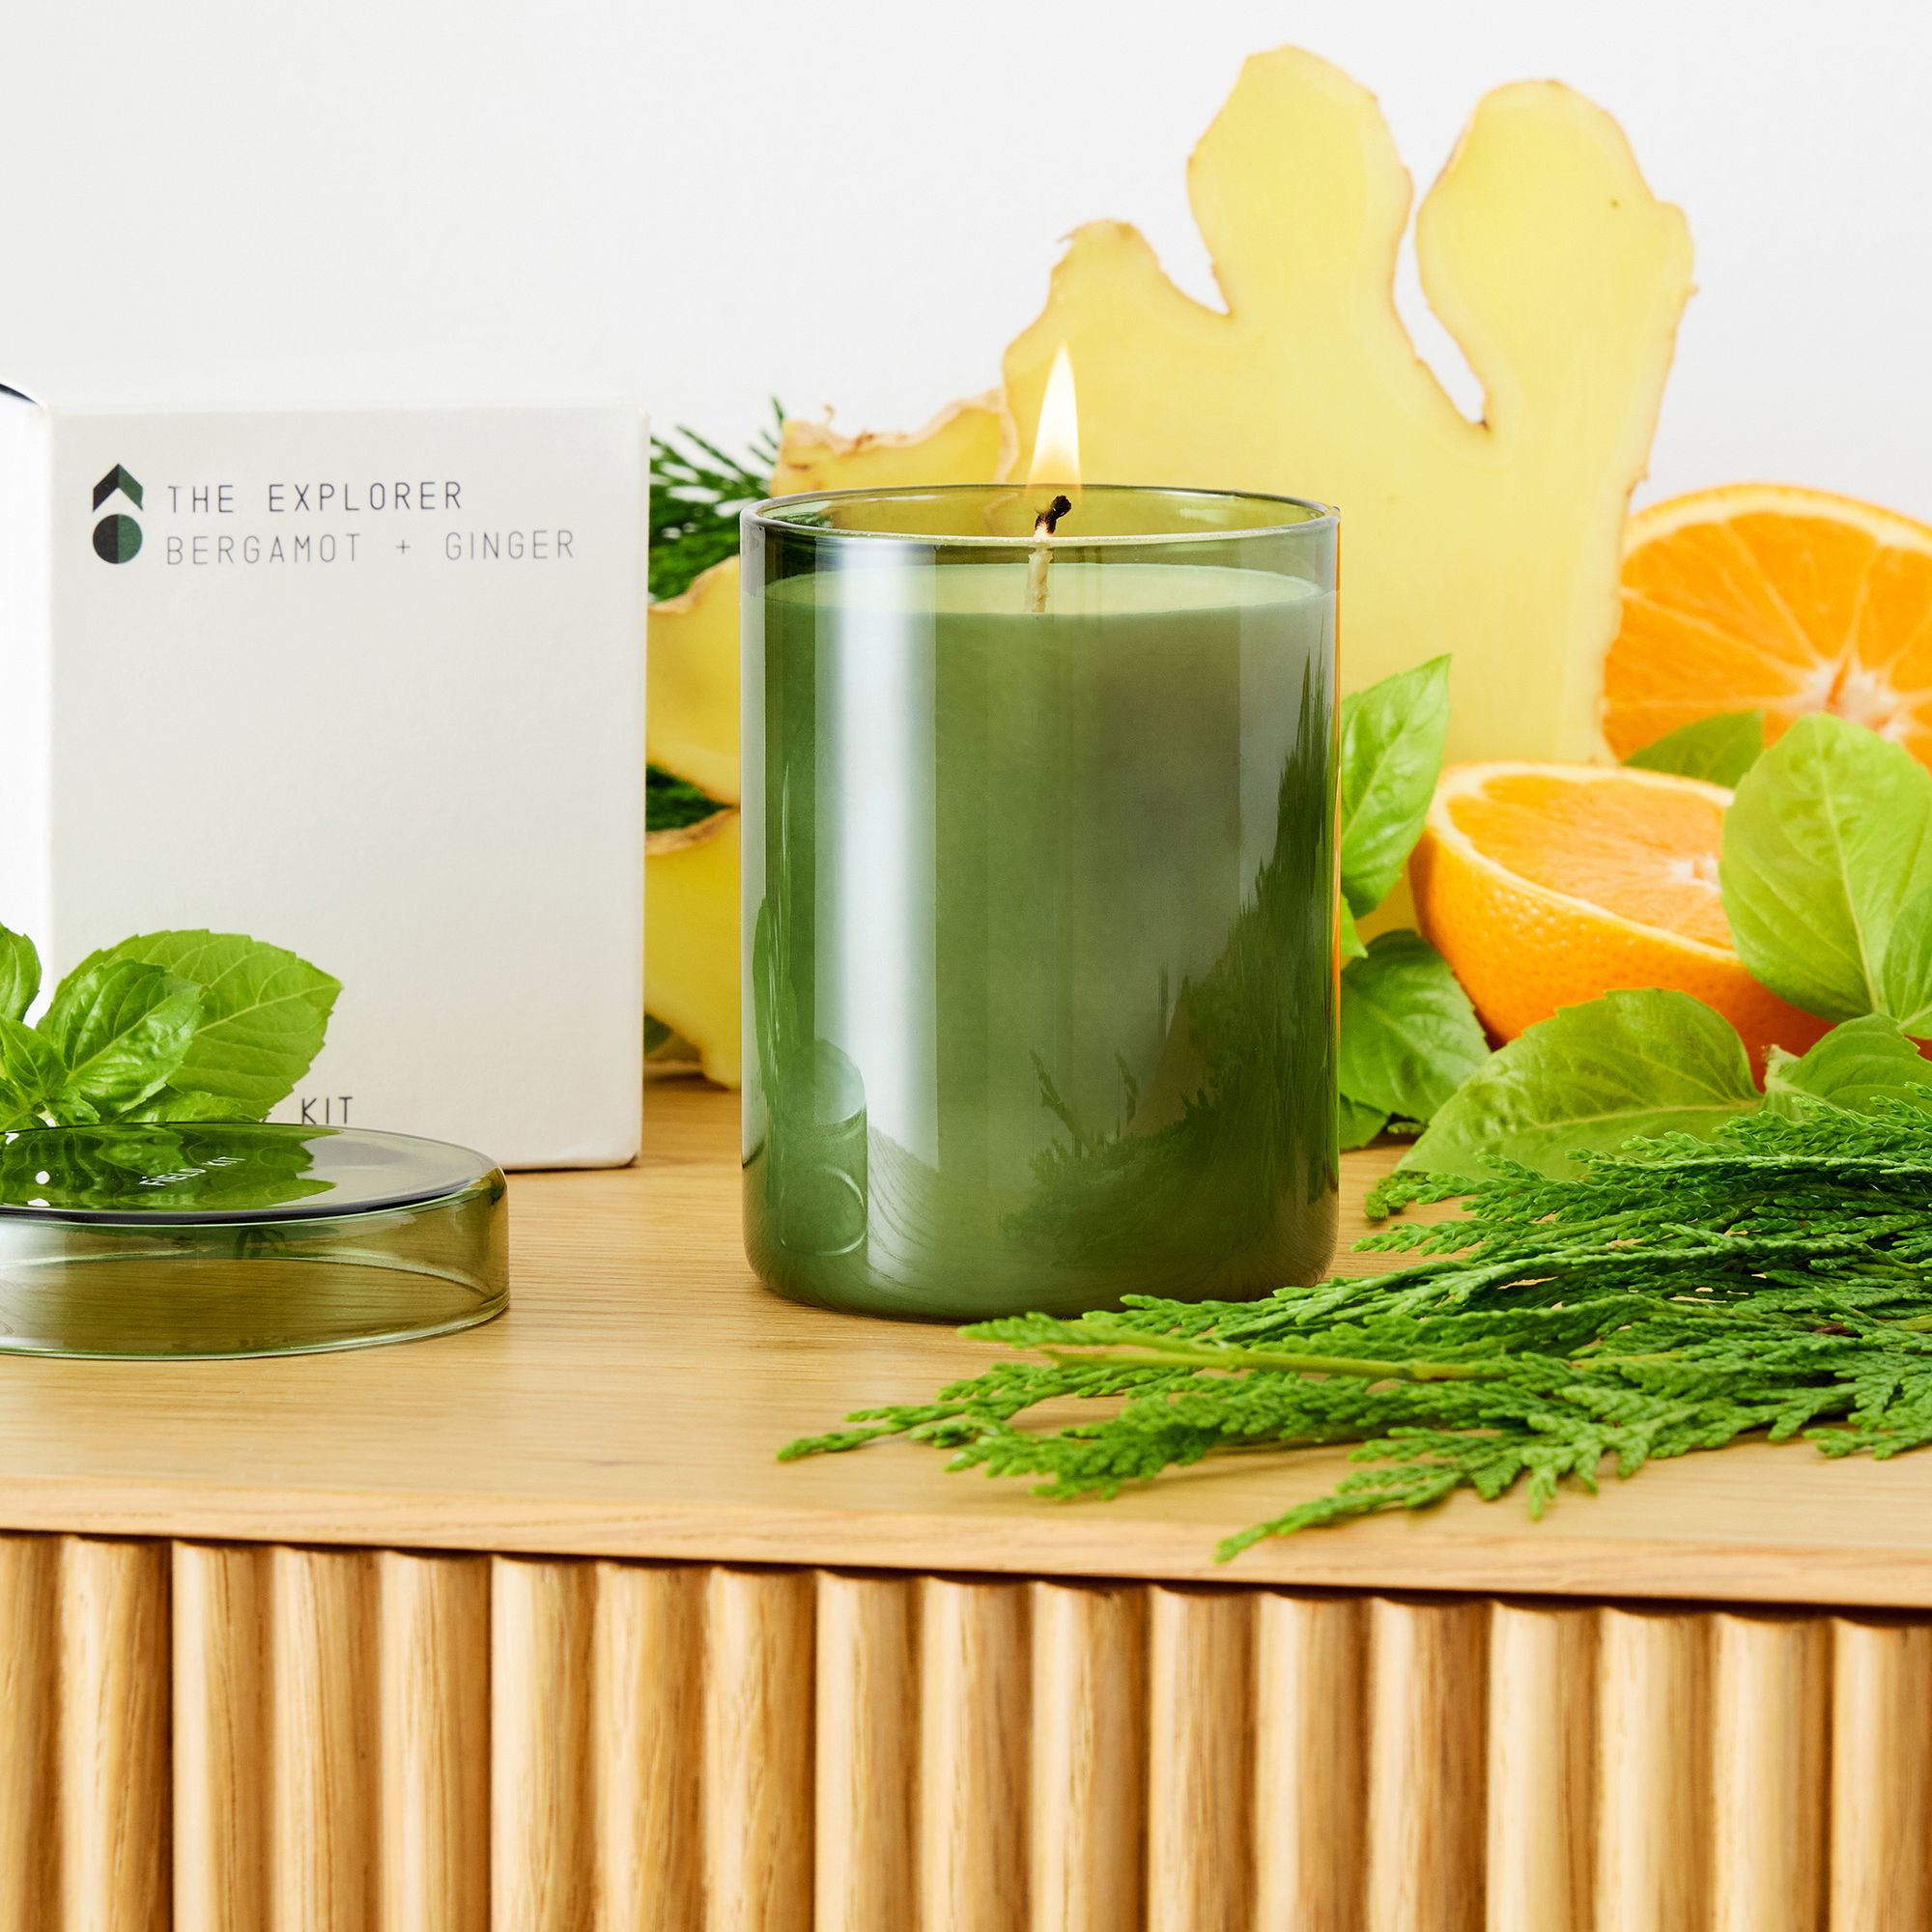 Field Kit - The Explorer Candle | West Elm